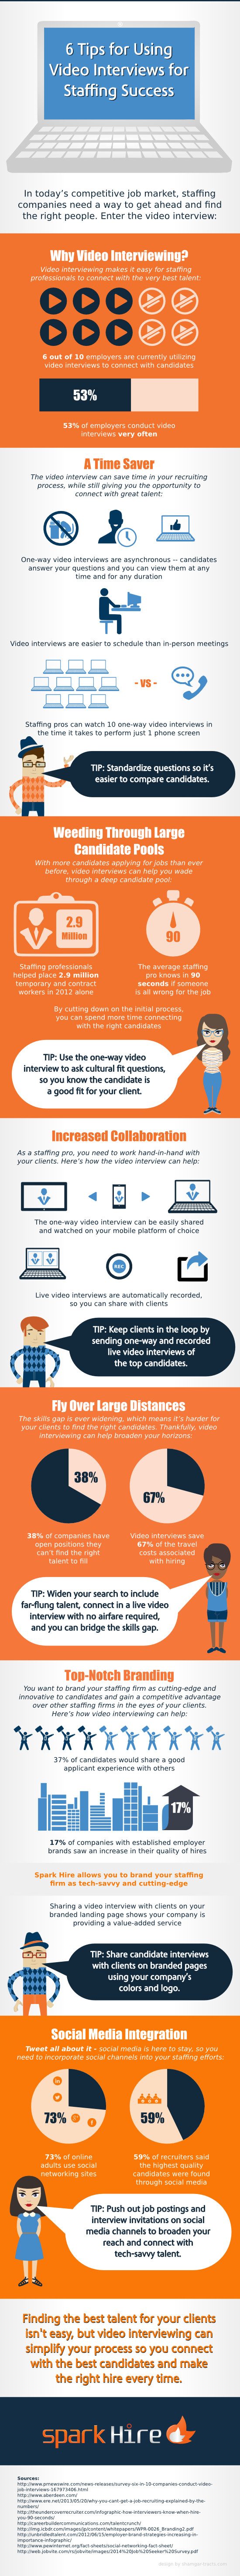 6 Tips for Using Video Interviews for Staffing Success Infographic